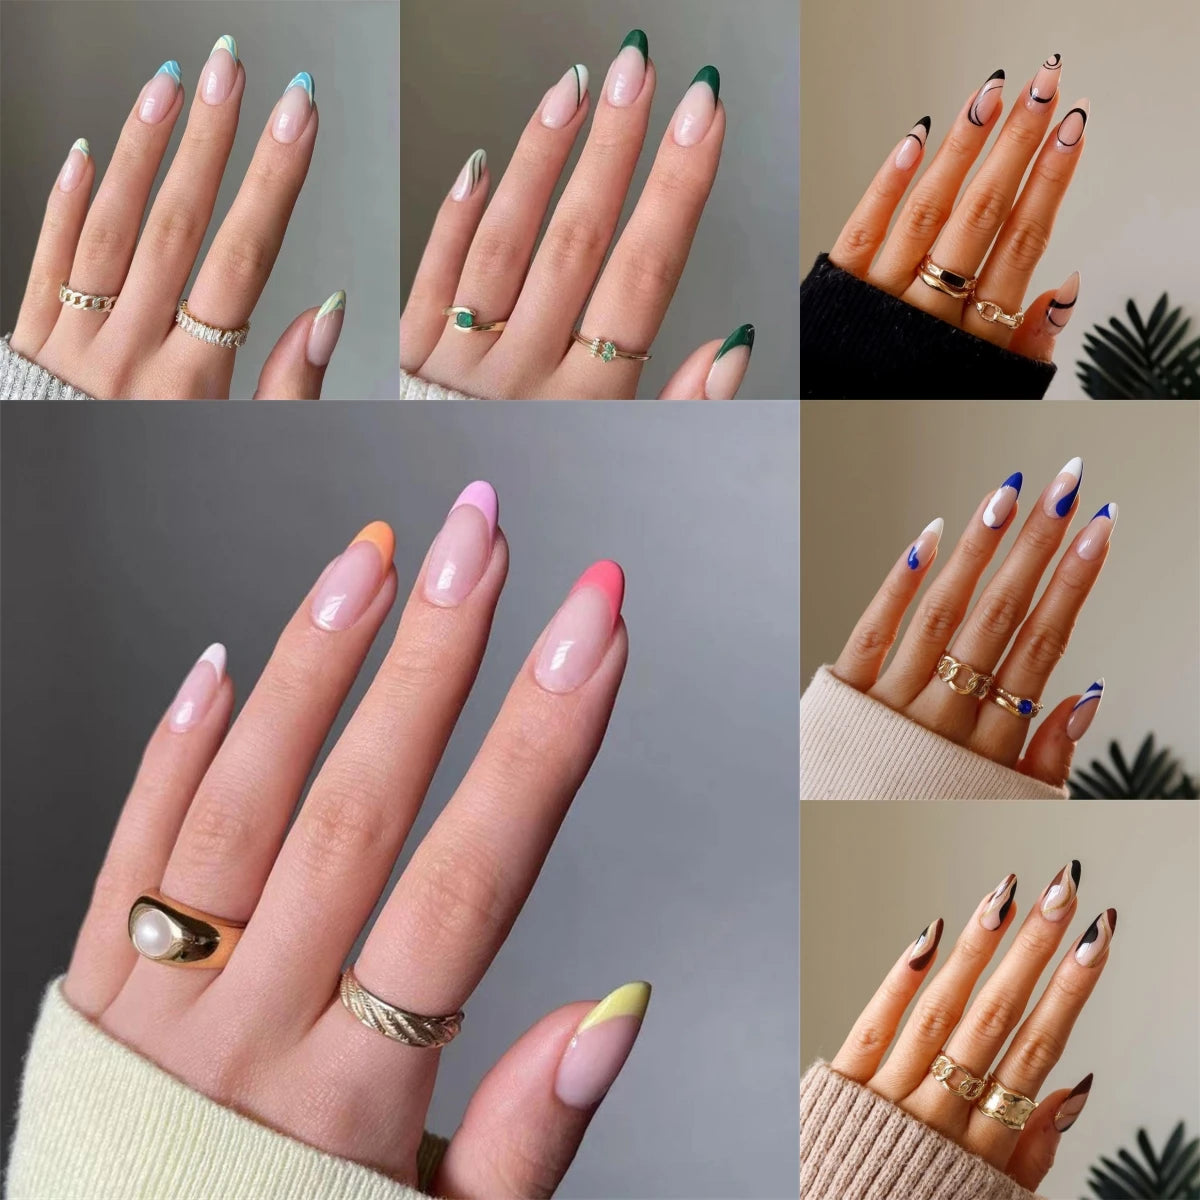 24Pcs/Lot Oval Almond Fake Nails Collection Full Cover Acrylic Press on Nails Art Removable Reusable Wearing False Nails Tips